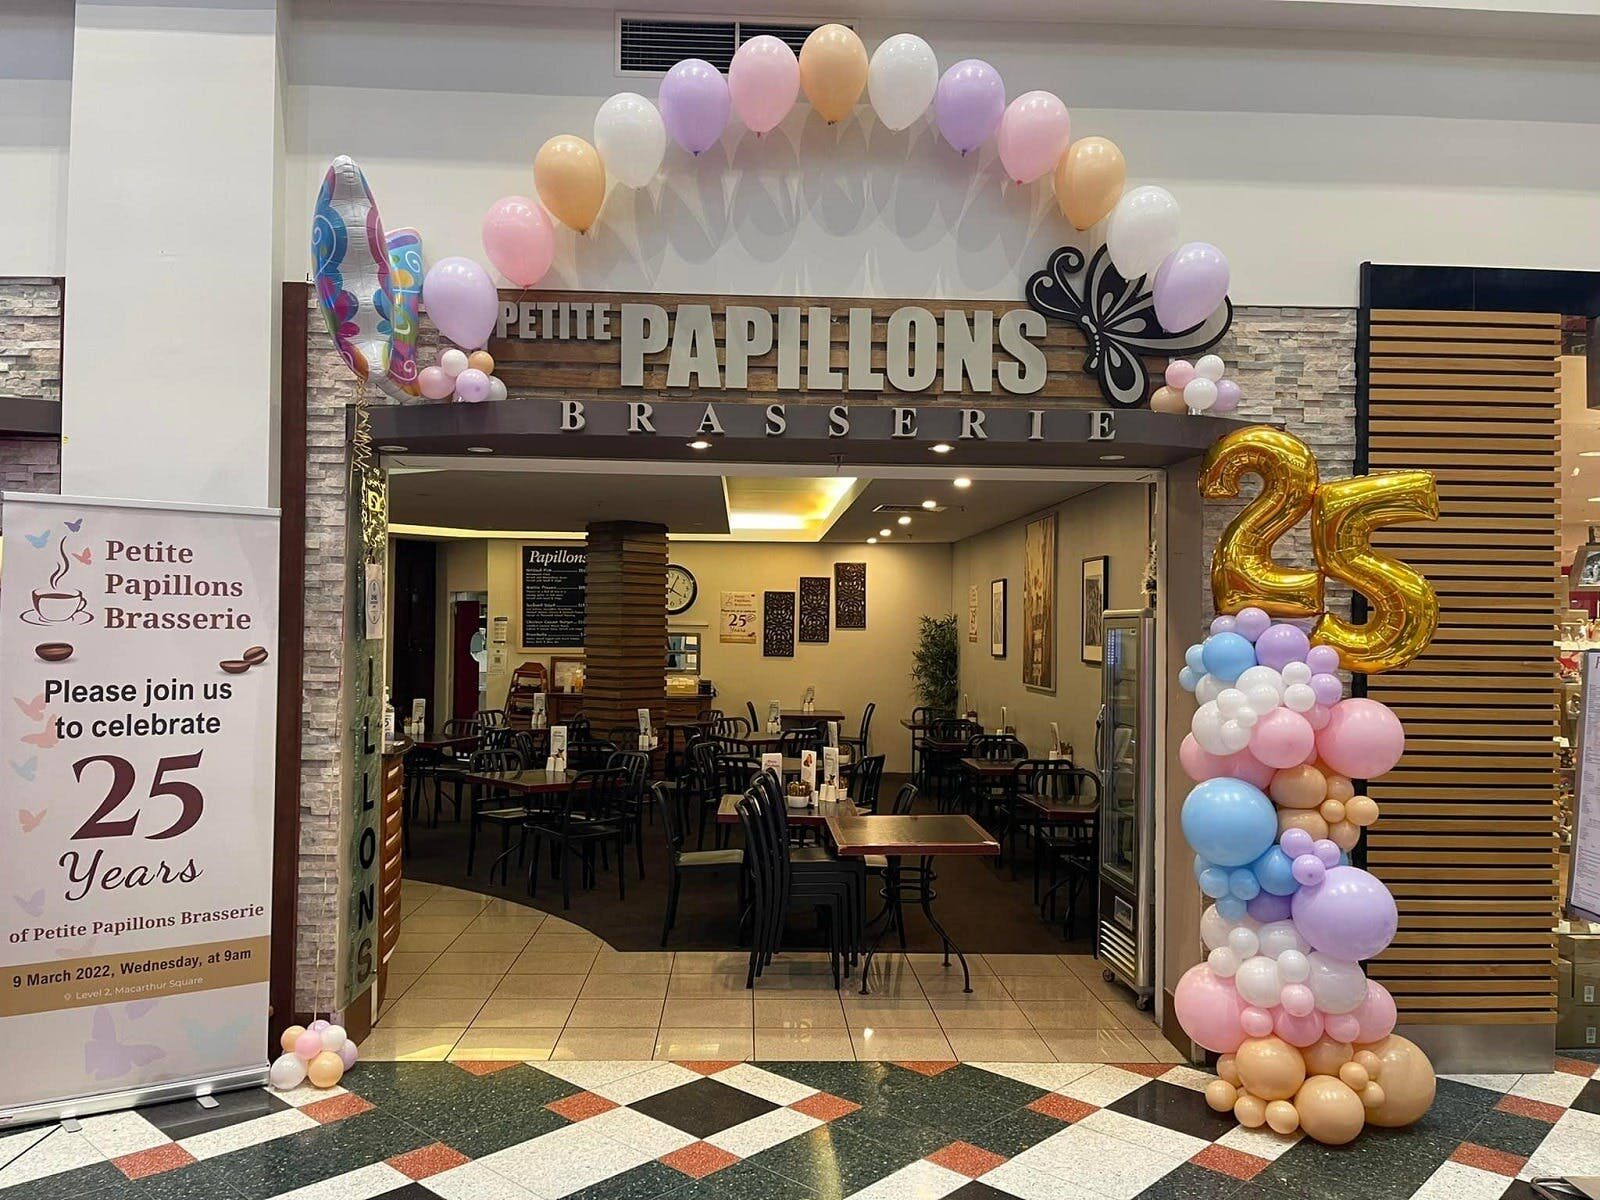 front view of Petite Papillons Brasserie in Macarthur Square Campbelltown